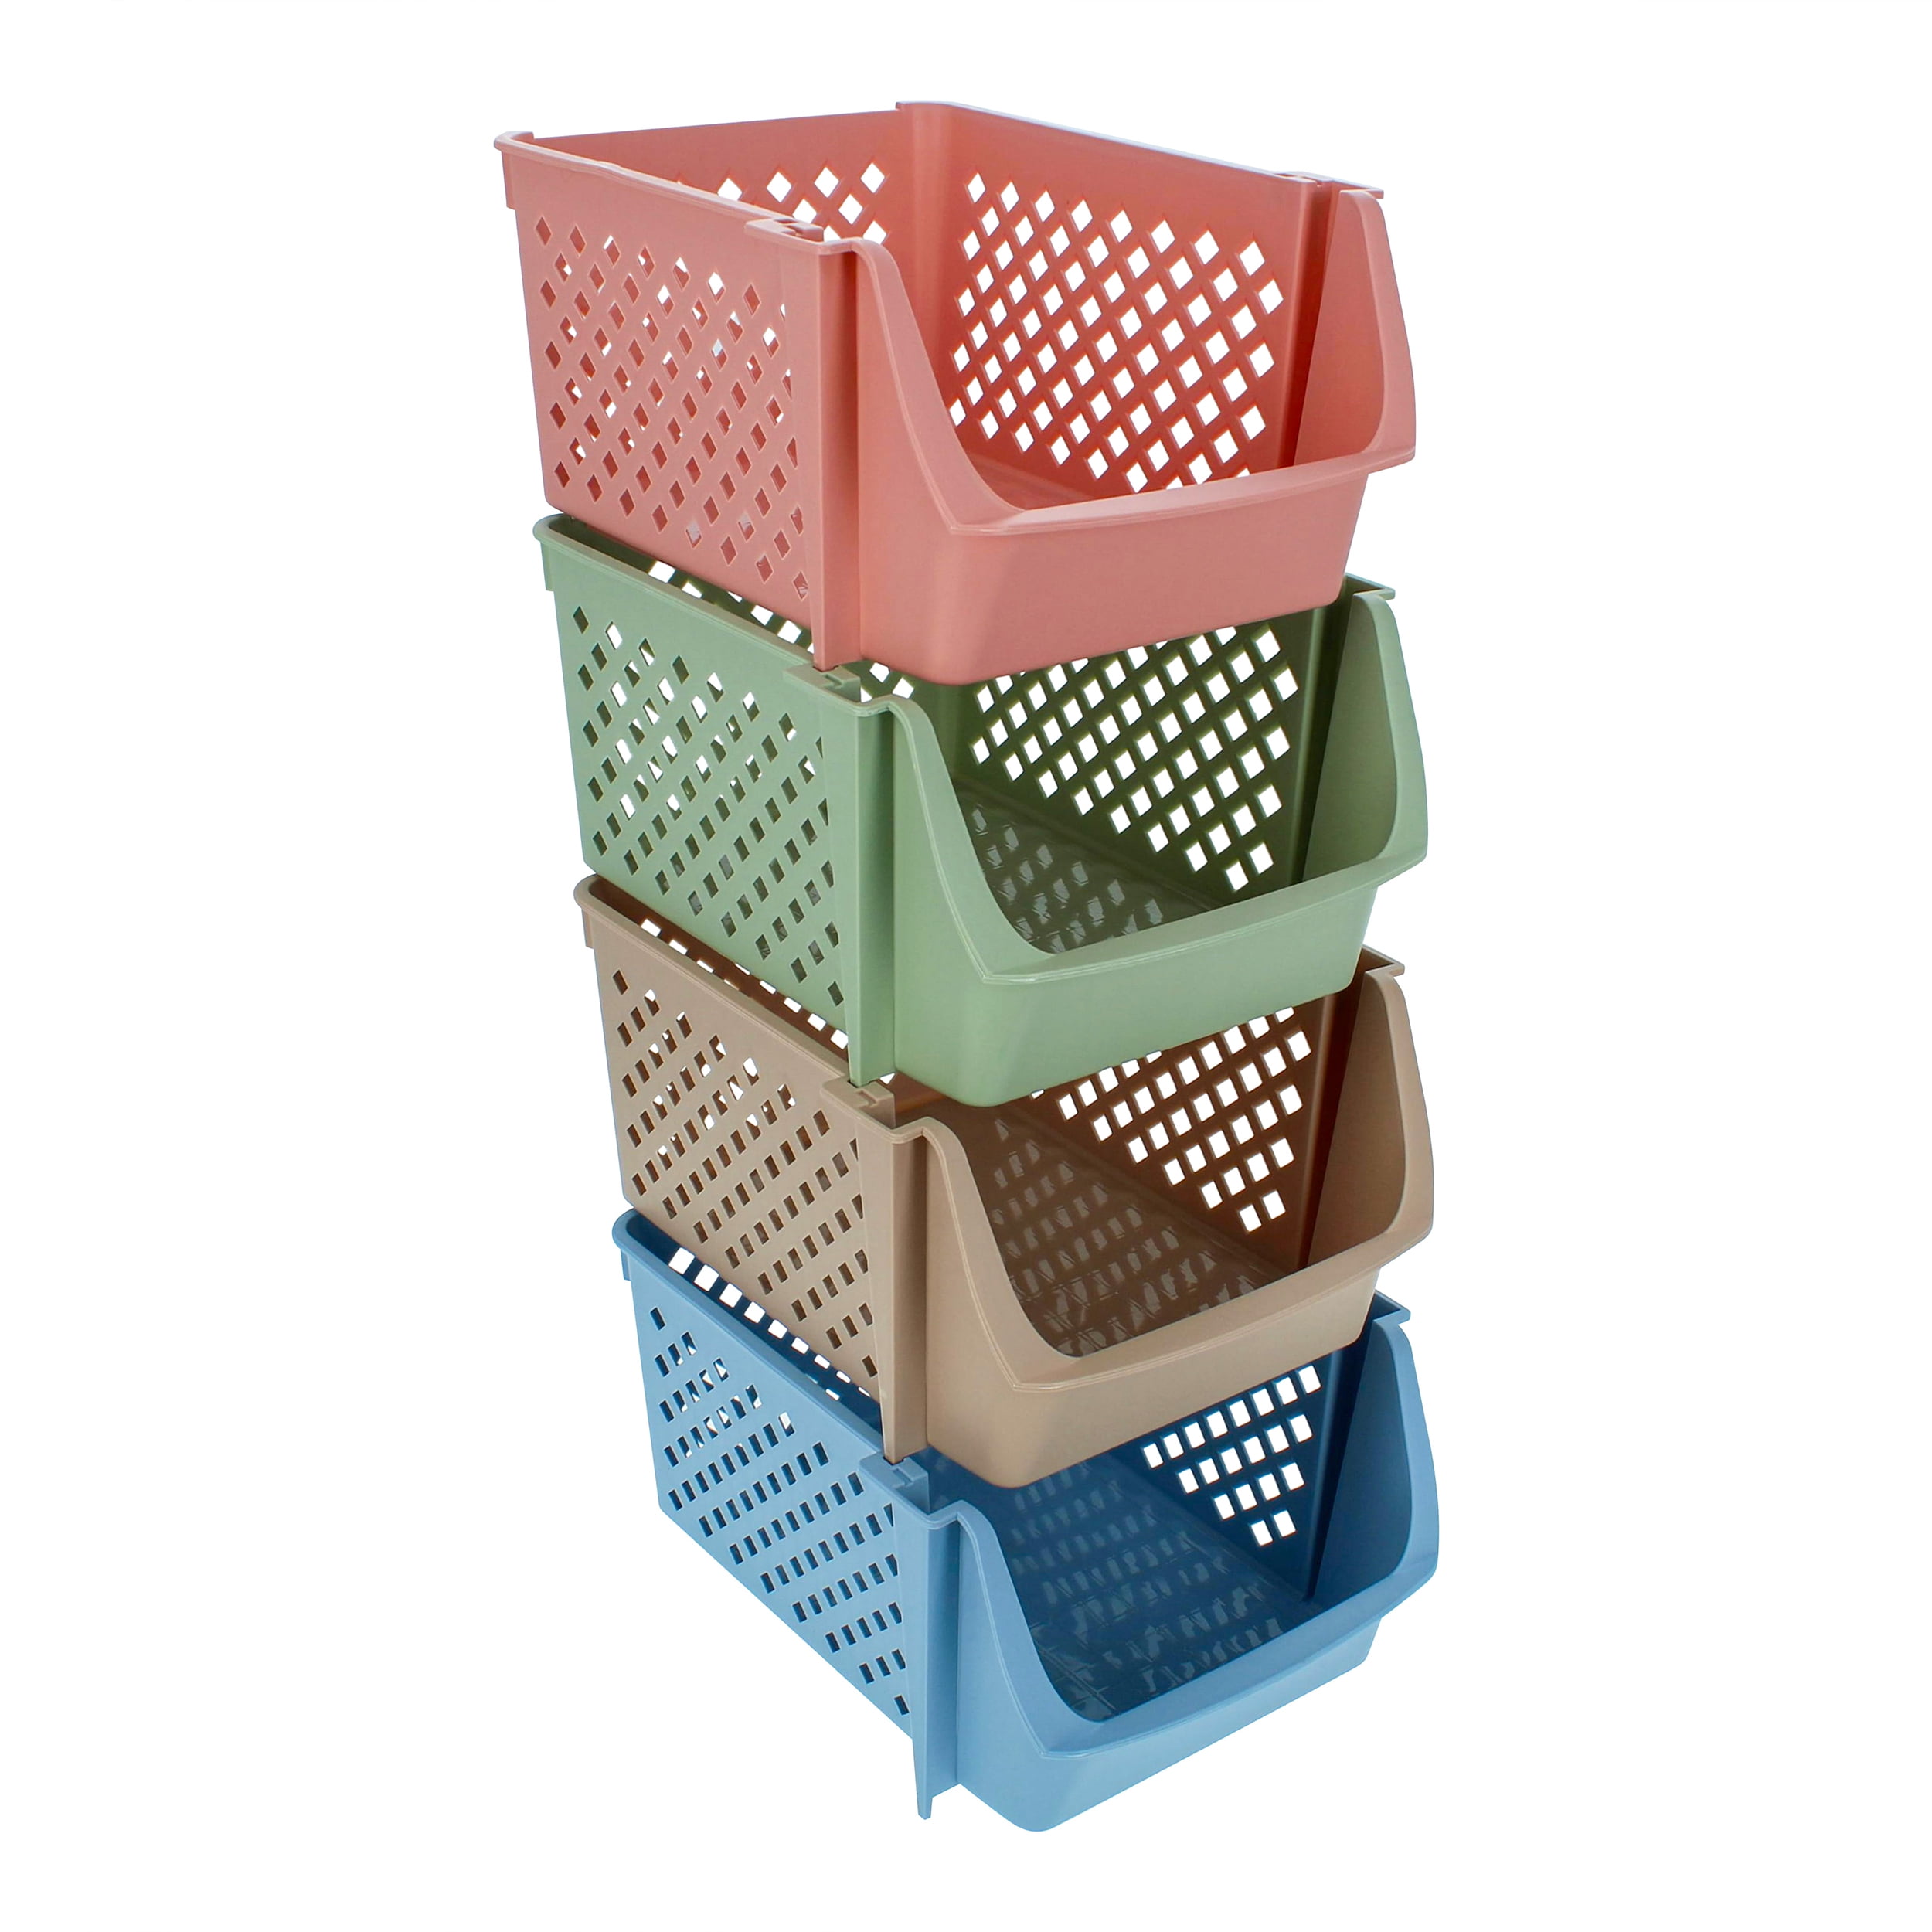 Creekview Home Emporium Plastic Stackable Storage Bin 28in Tall 4pc Colored  Set